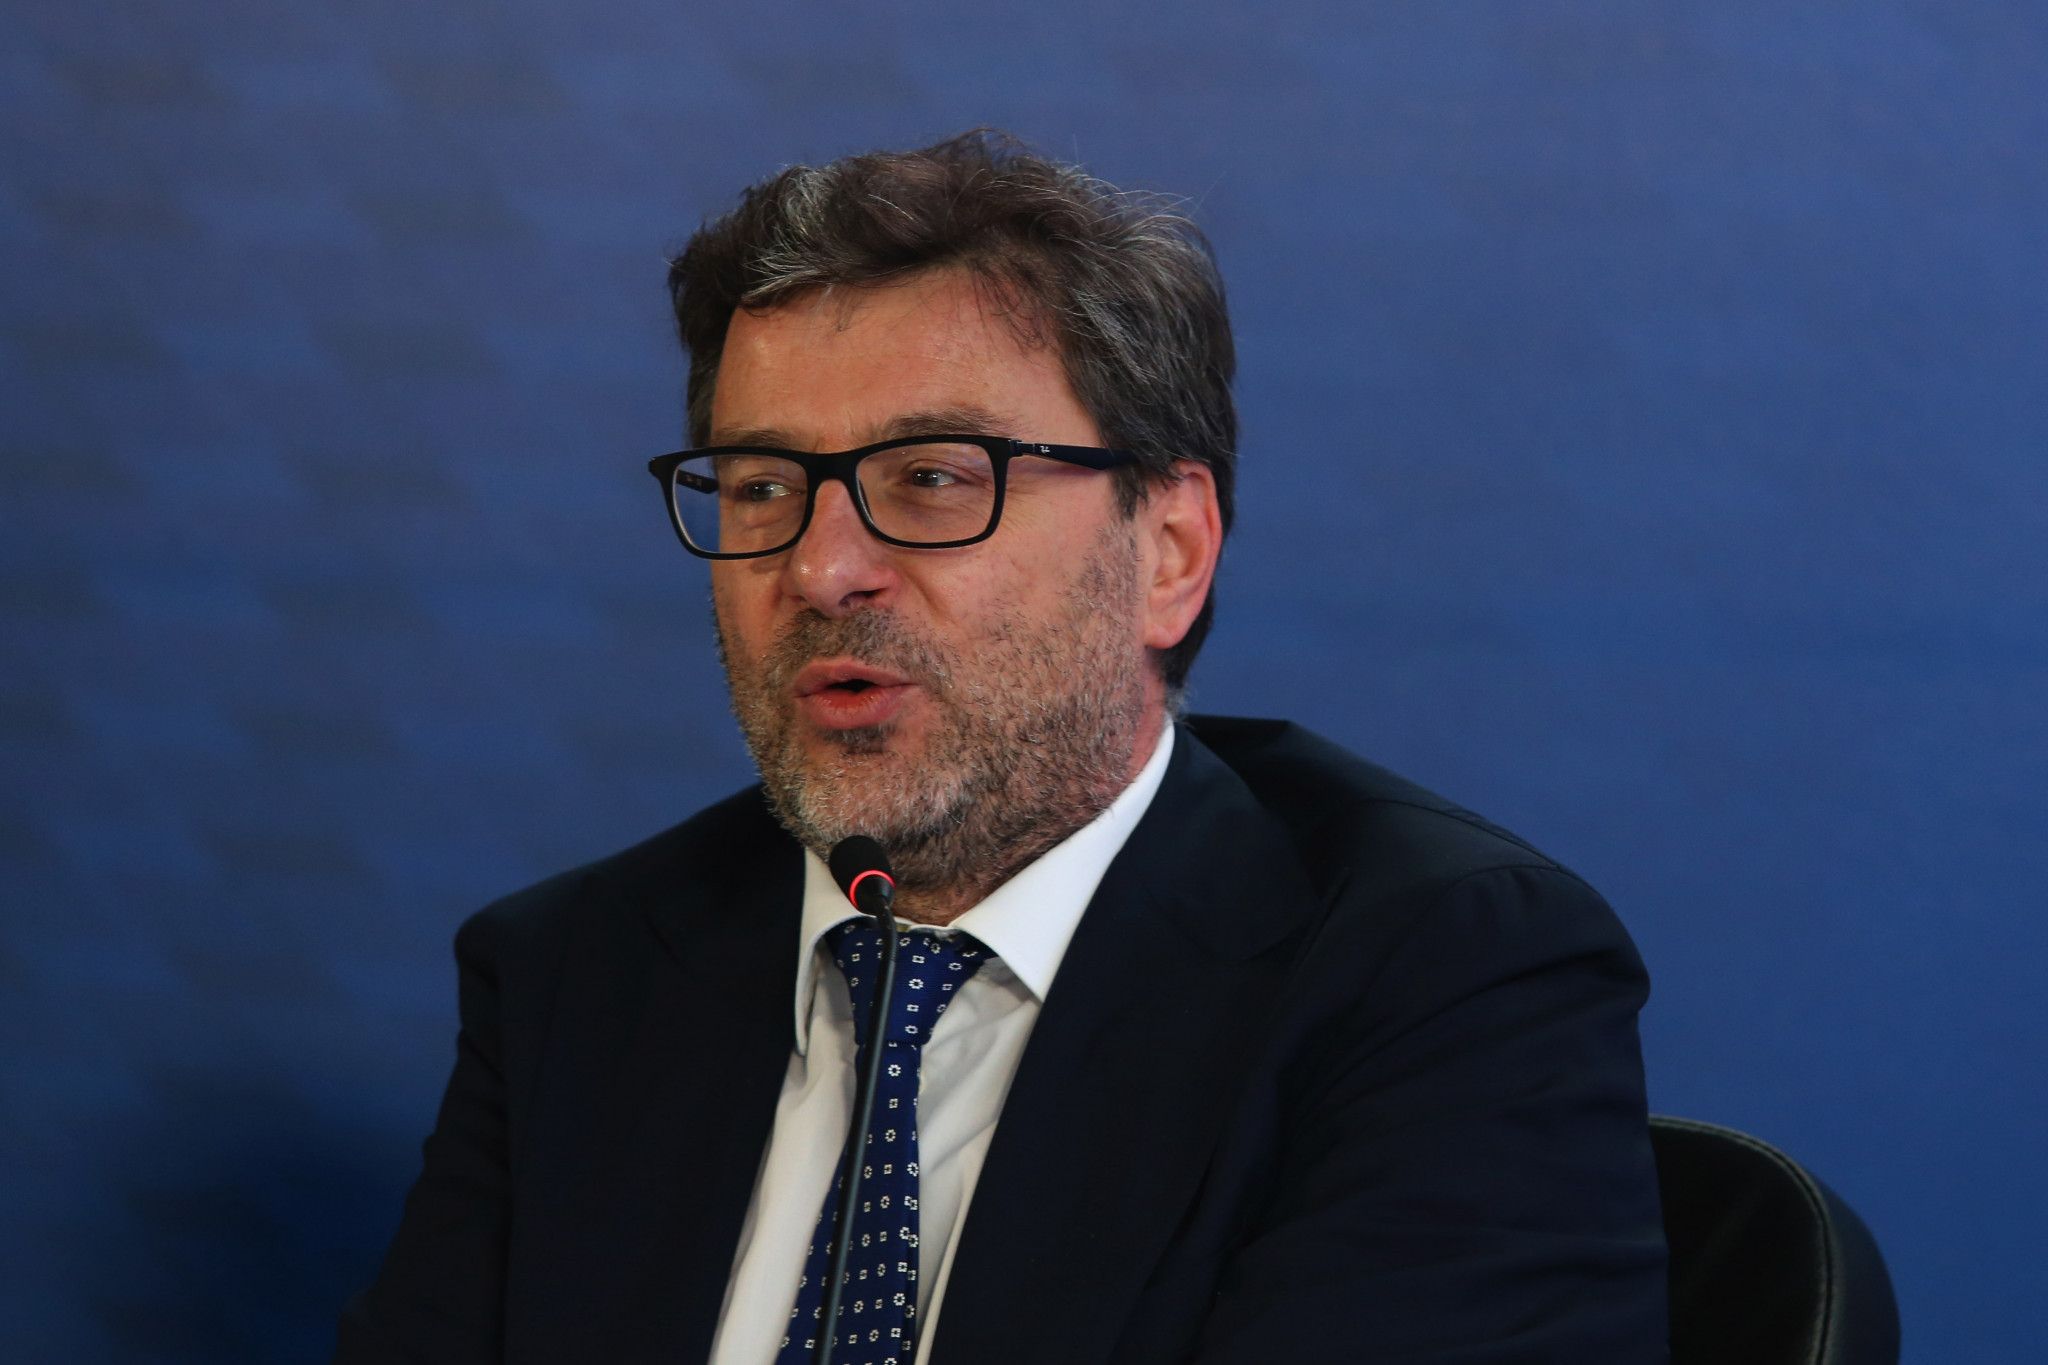 Minister of Economic Development Giancarlo Giorgetti took part in the conference as one of the speakers ©Getty Images